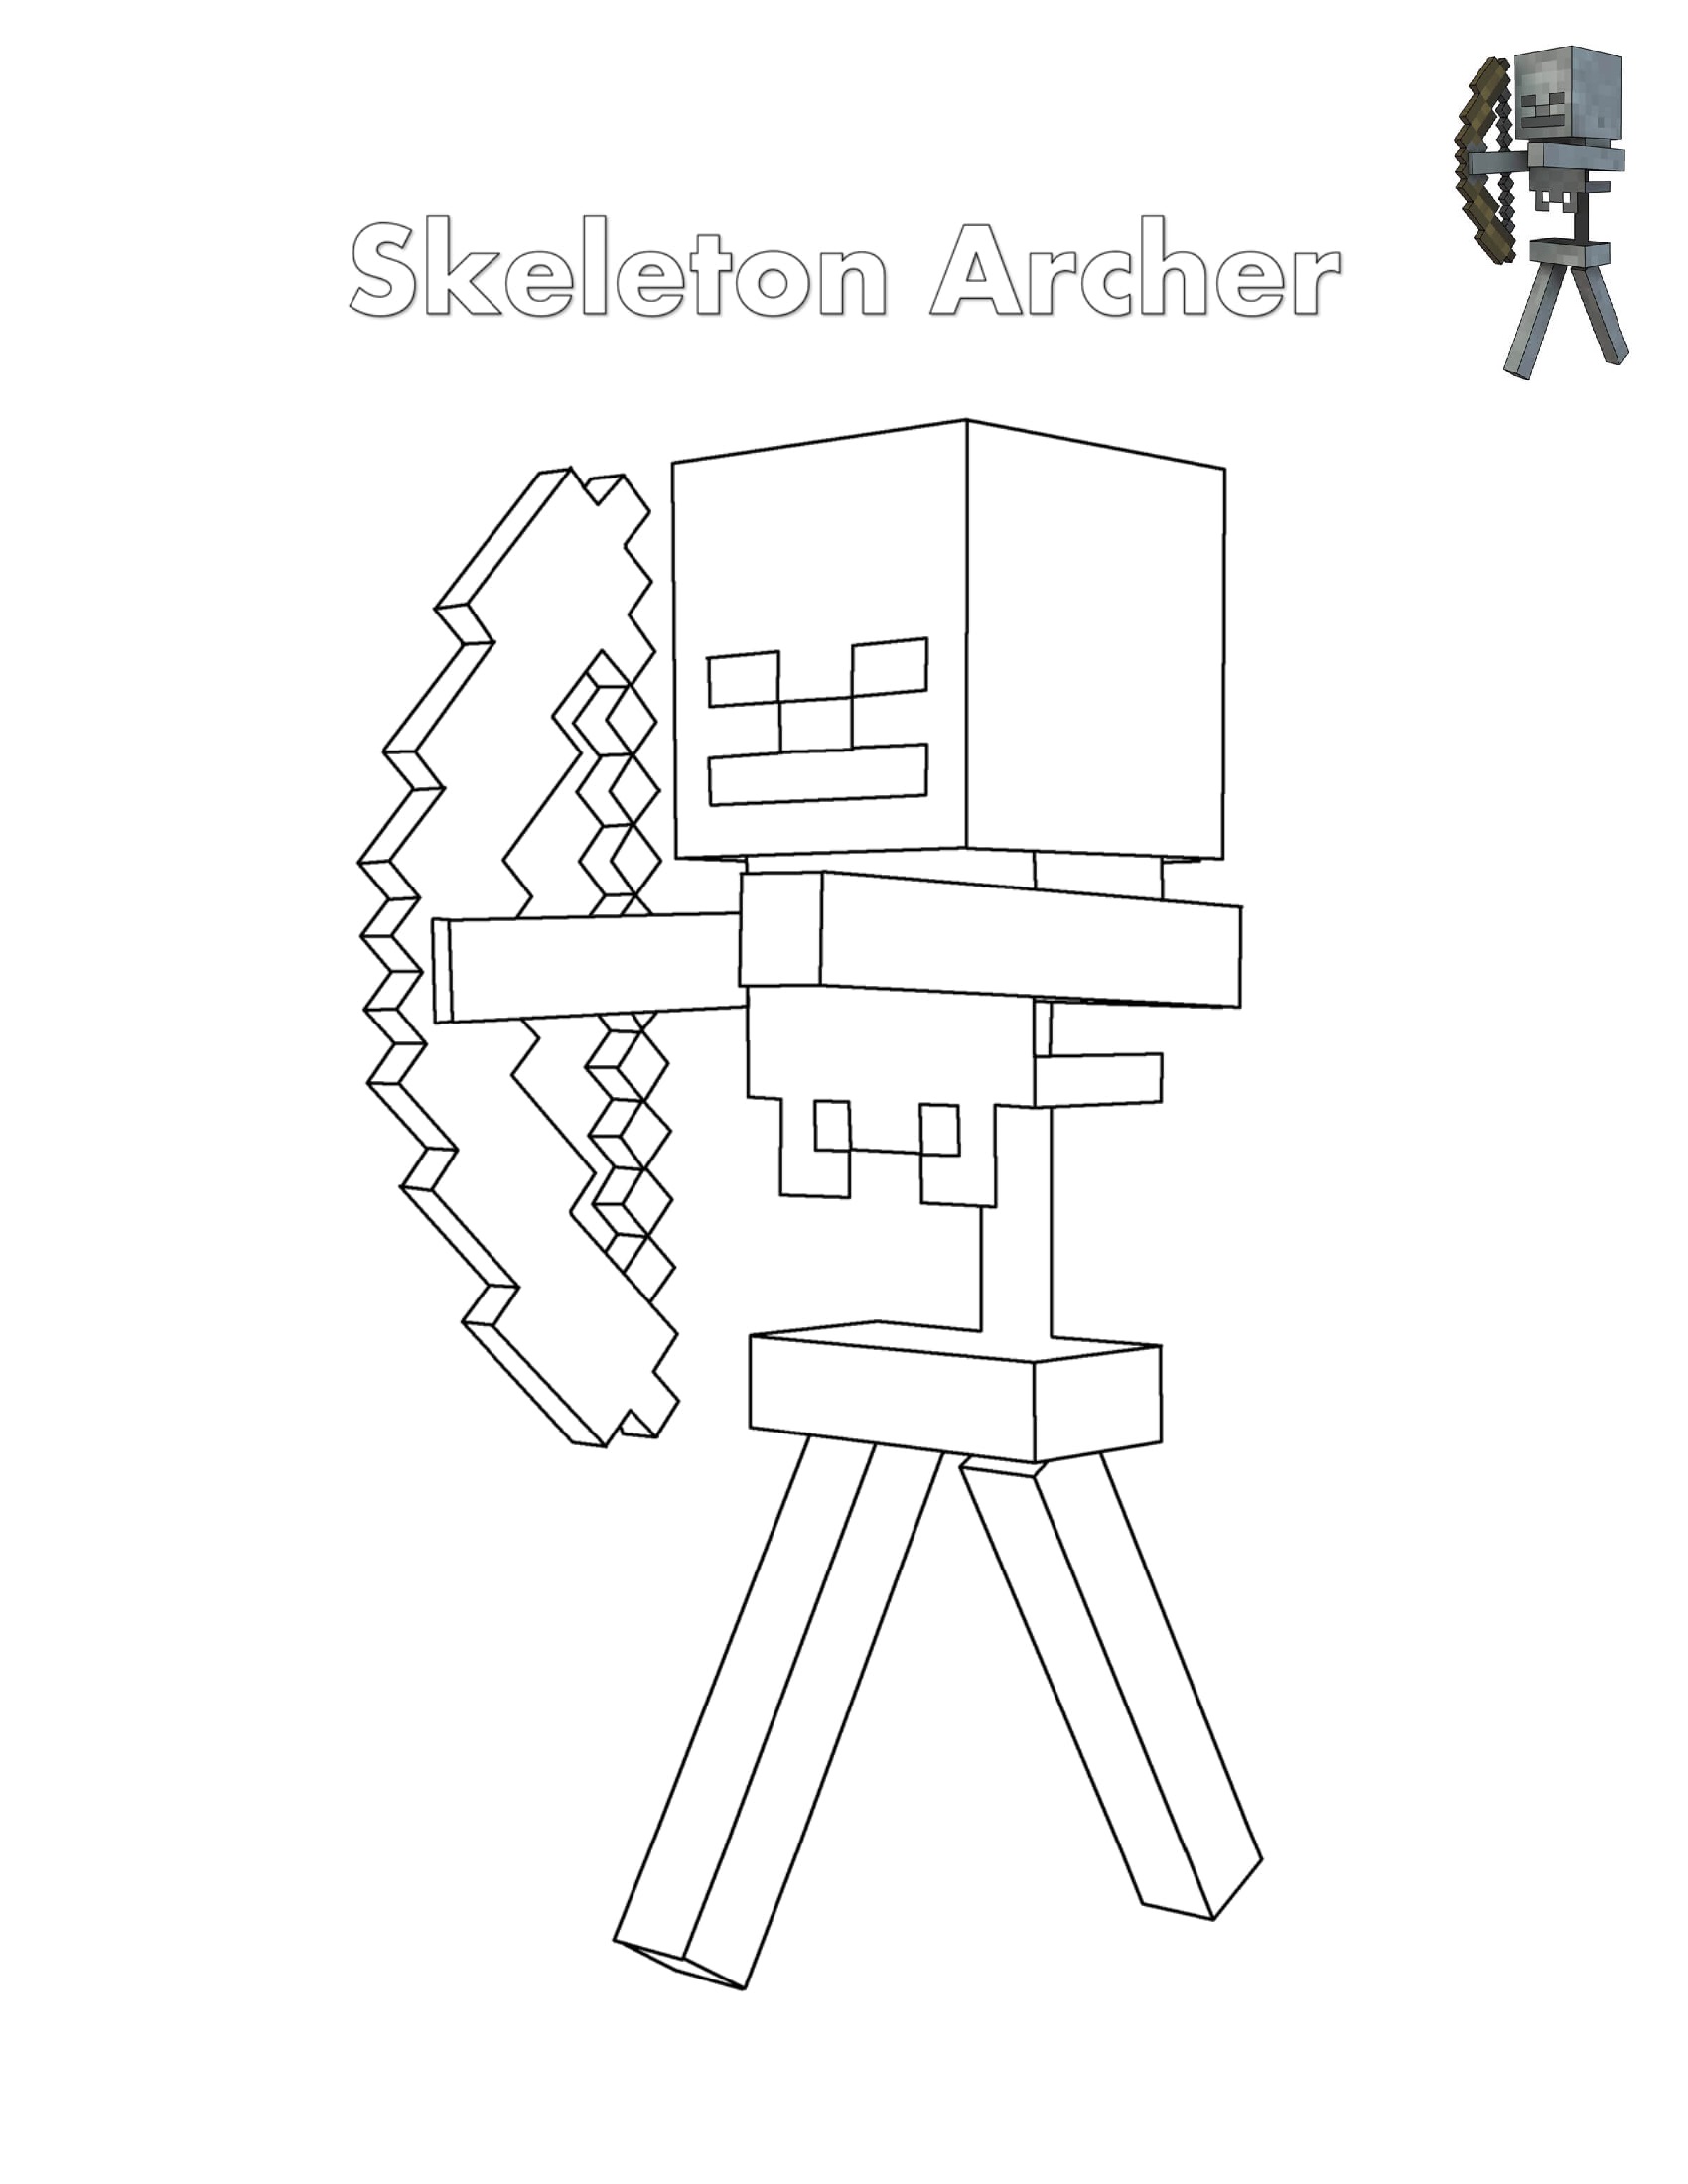 Skeleton Archer Minecraft Coloring Pages   Coloring Cool